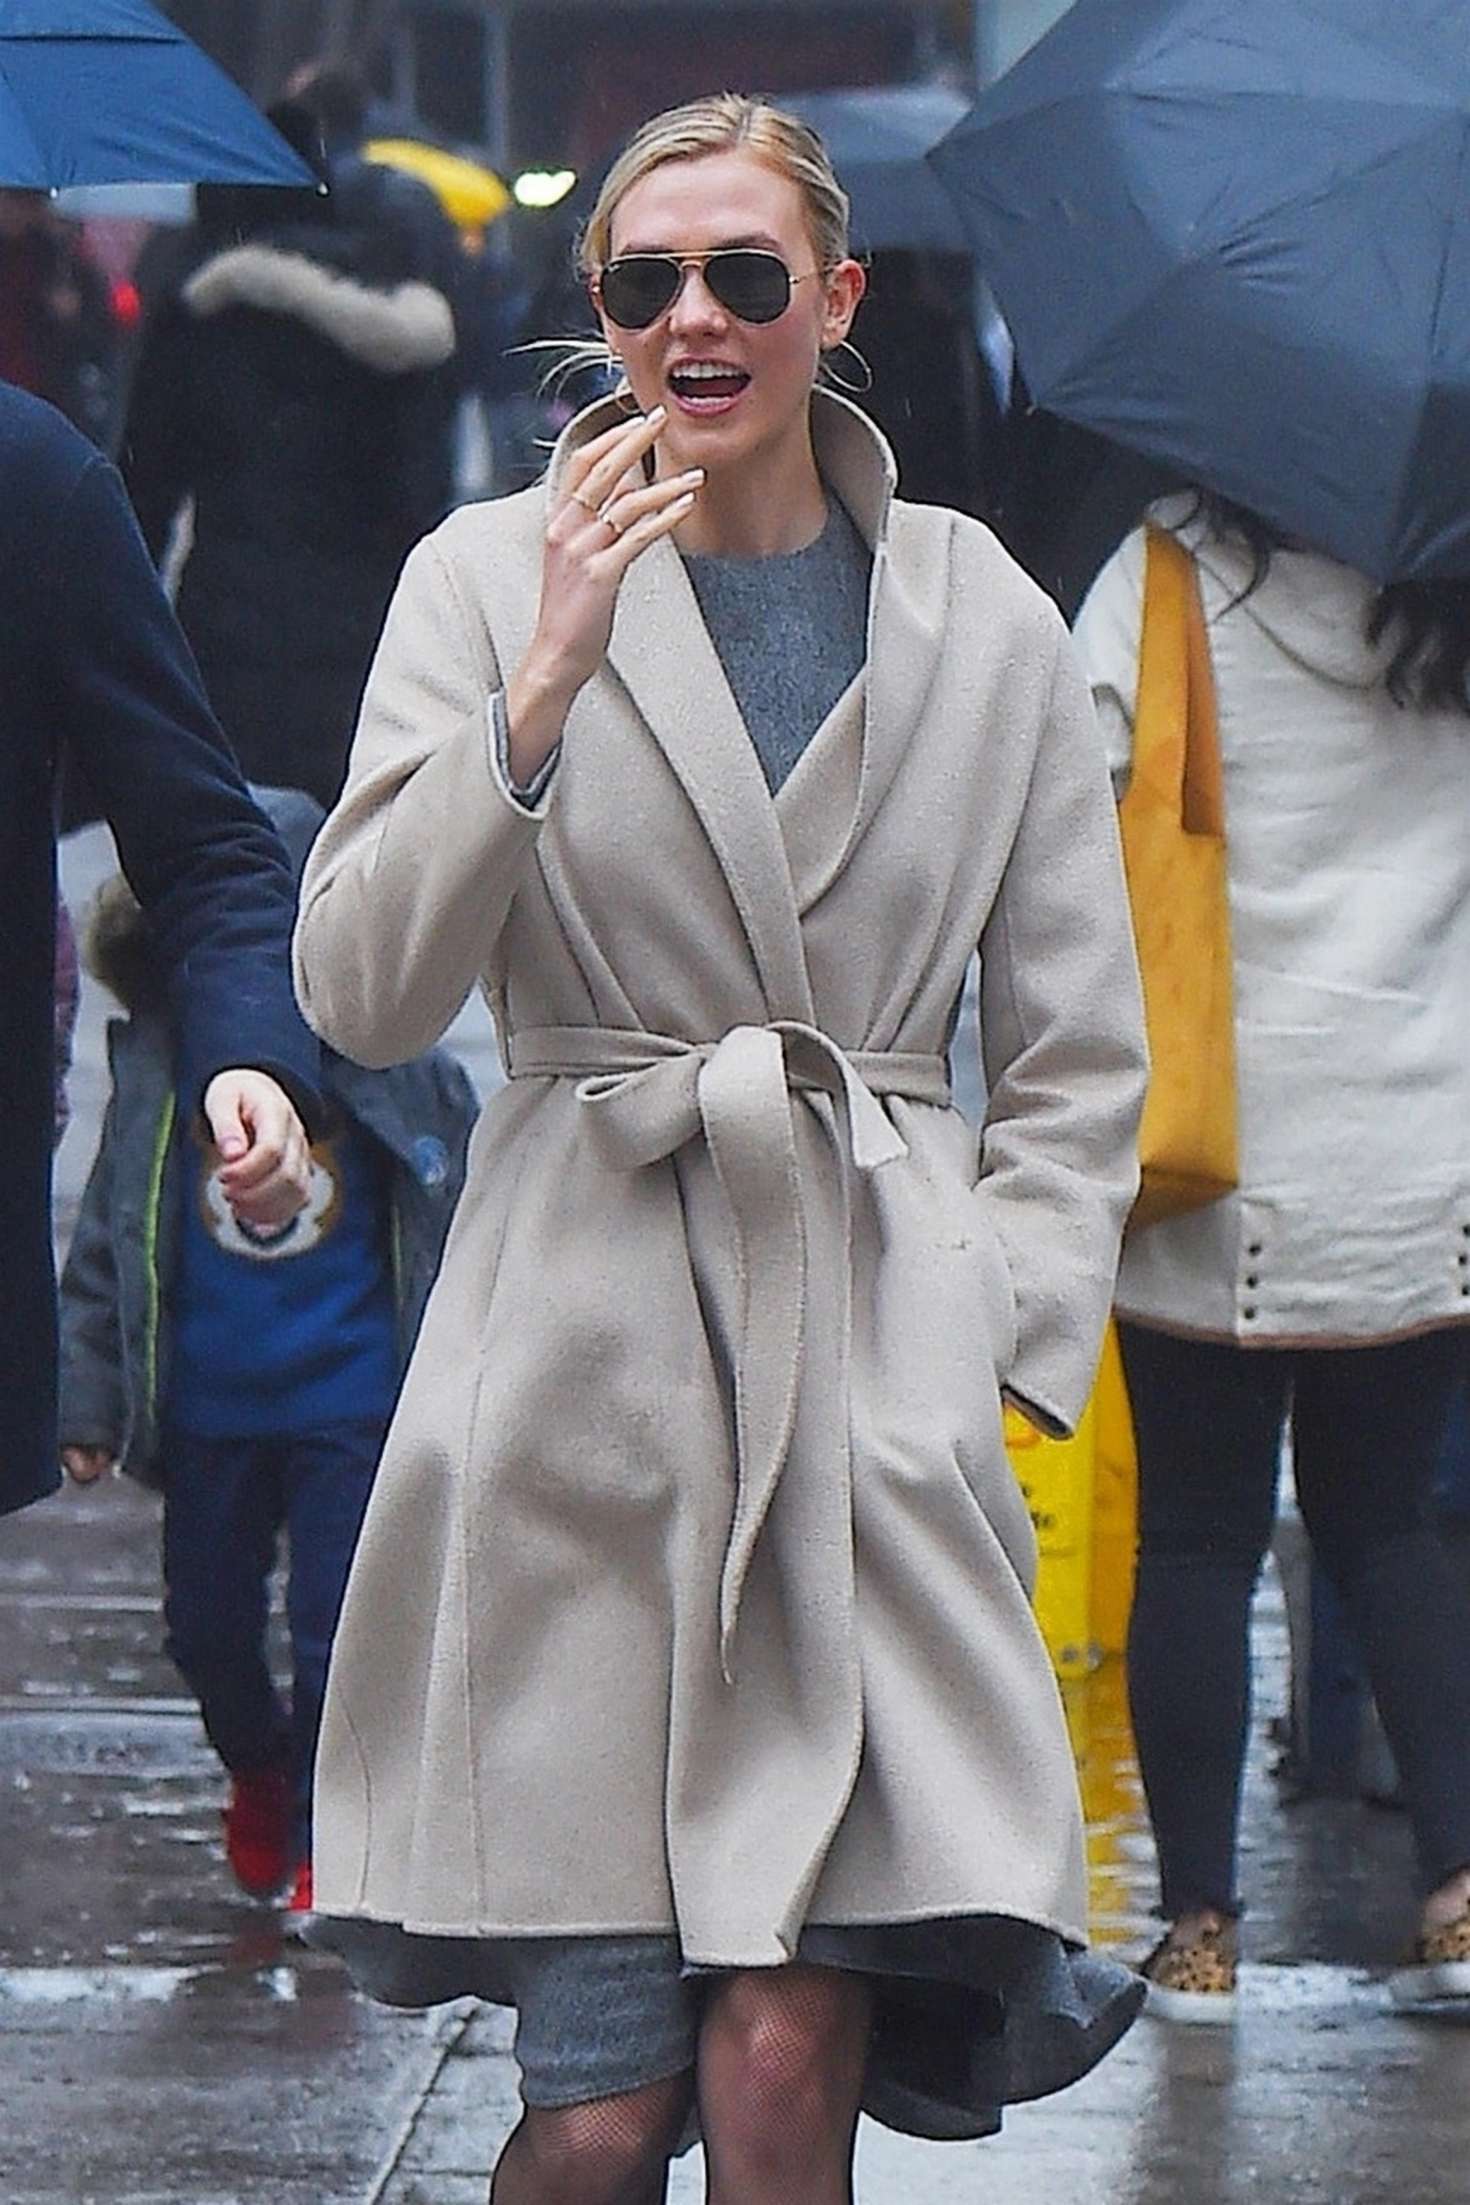 Karlie Kloss on the rain out in New York City